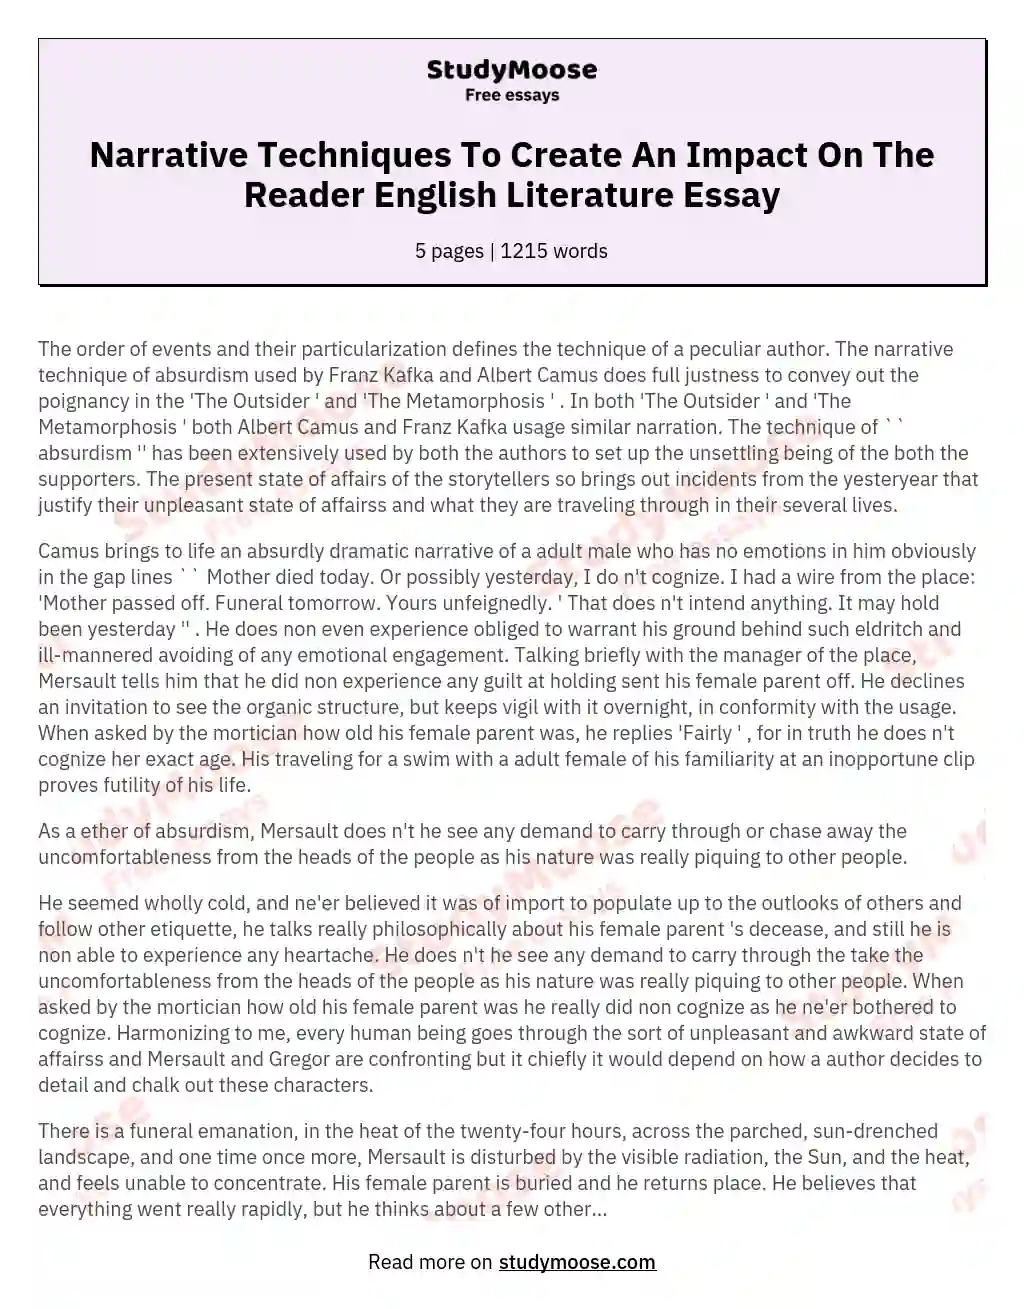 Narrative Techniques To Create An Impact On The Reader English Literature Essay